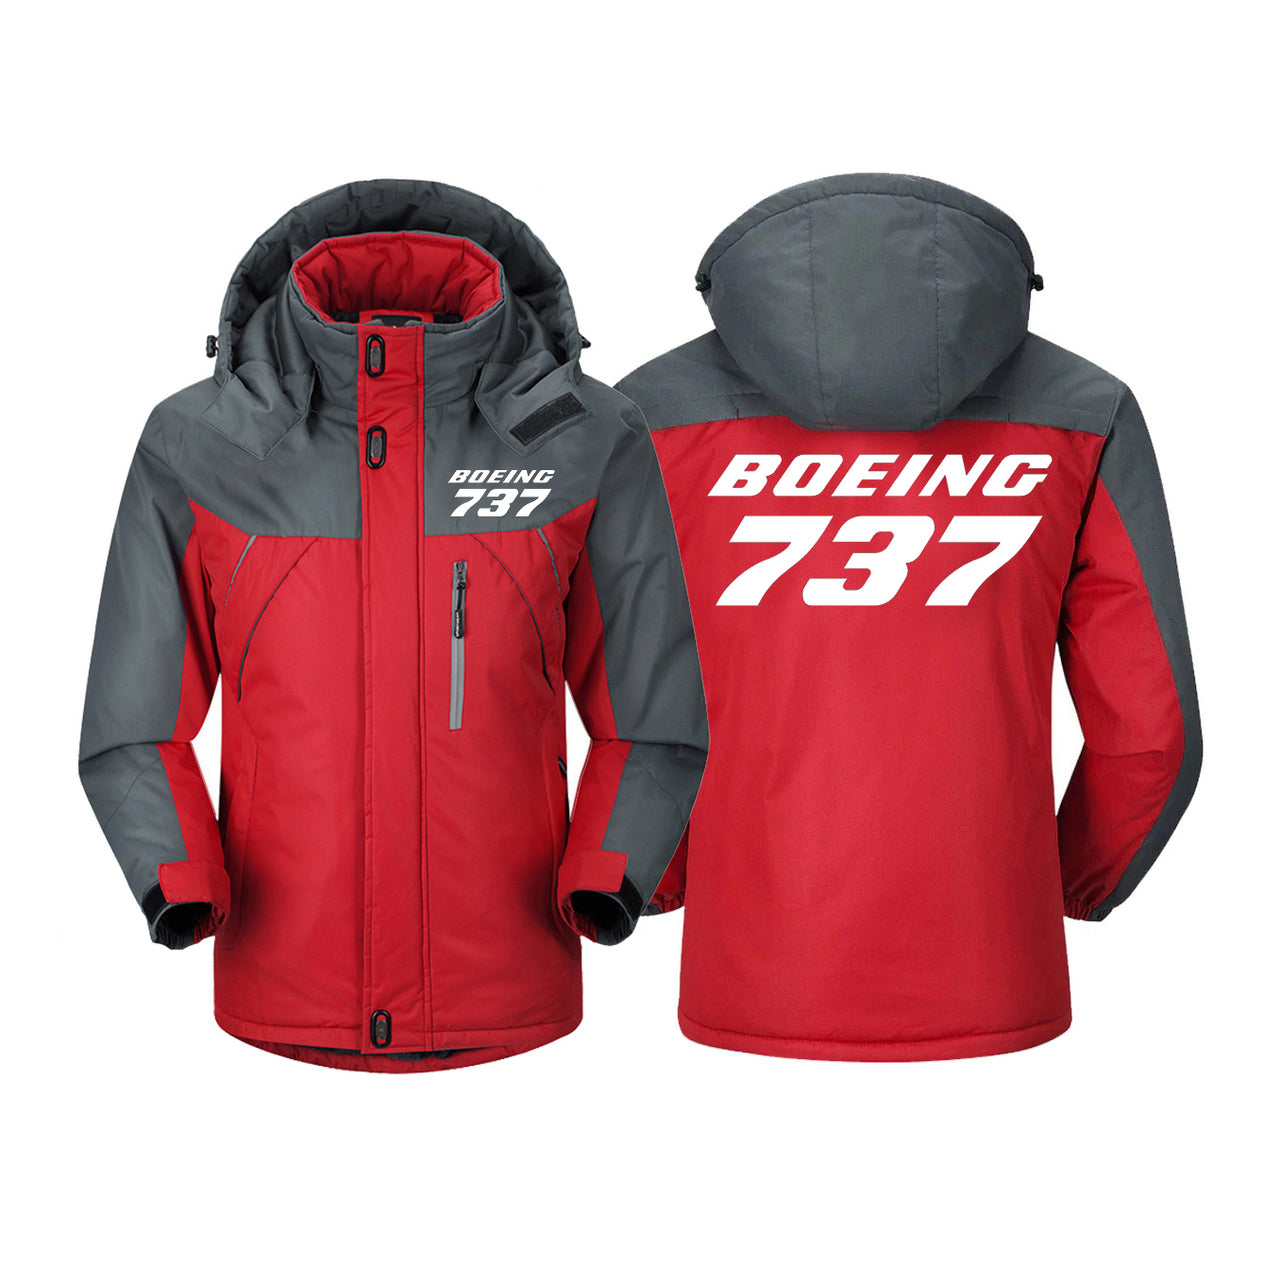 Boeing 737 & Text Designed Thick Winter Jackets